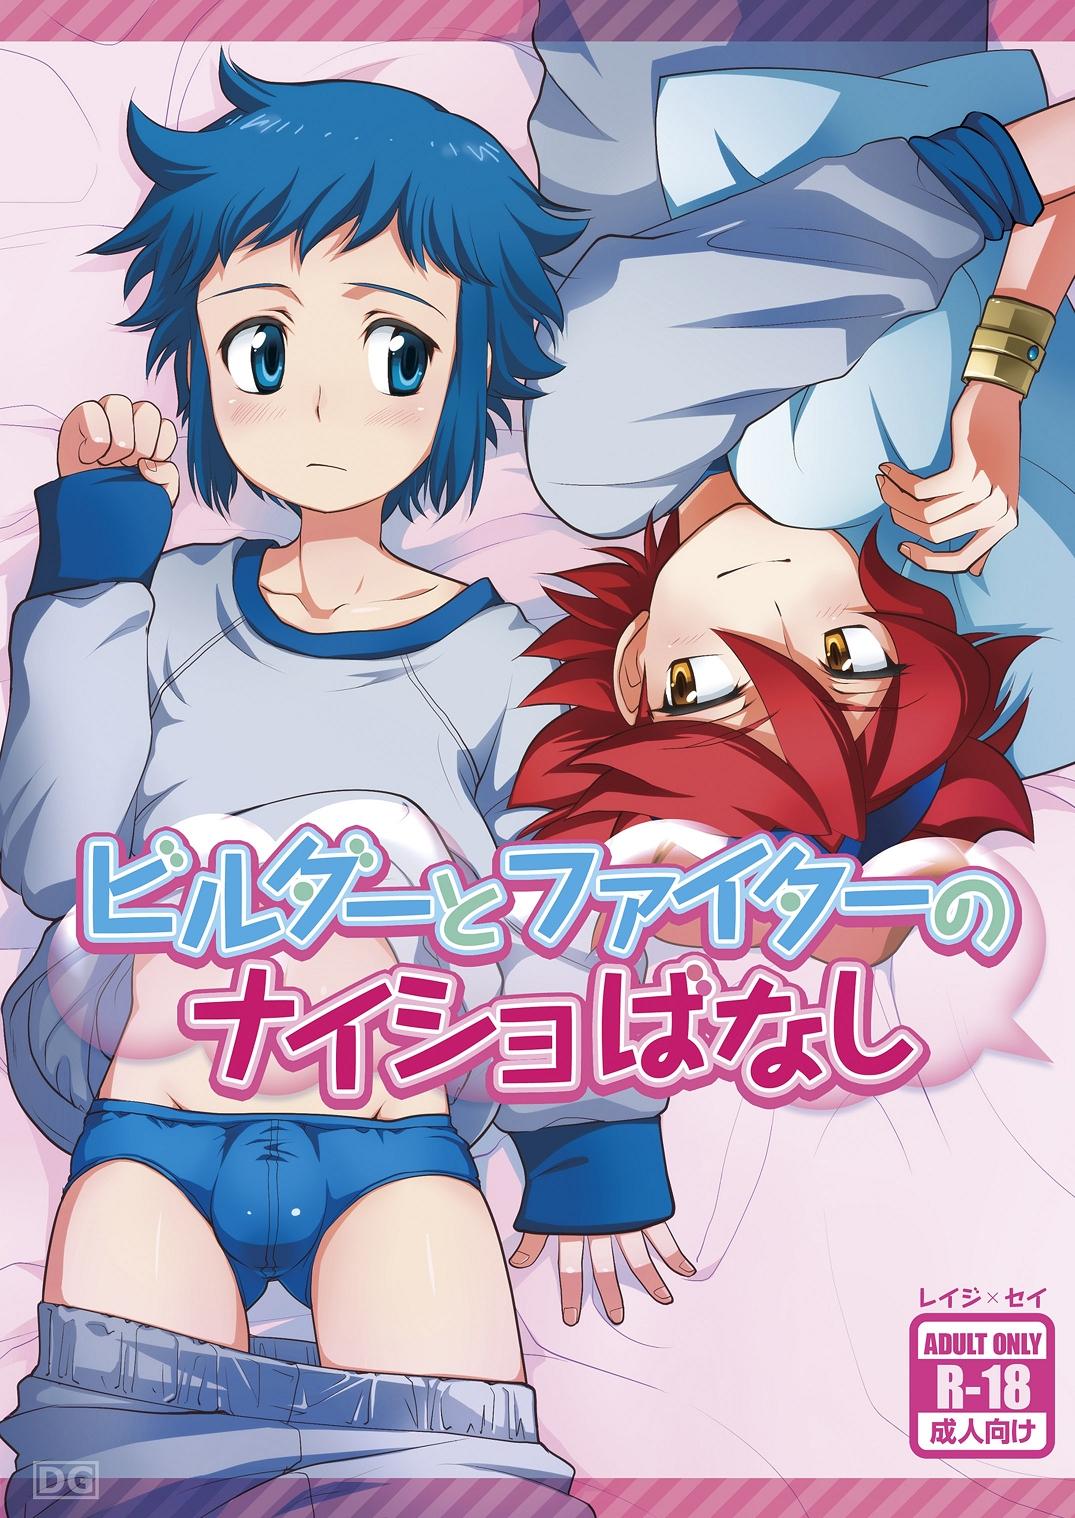 Asian Builder to Fighter no Naisho Banashi - Gundam build fighters Sex Massage - Page 1